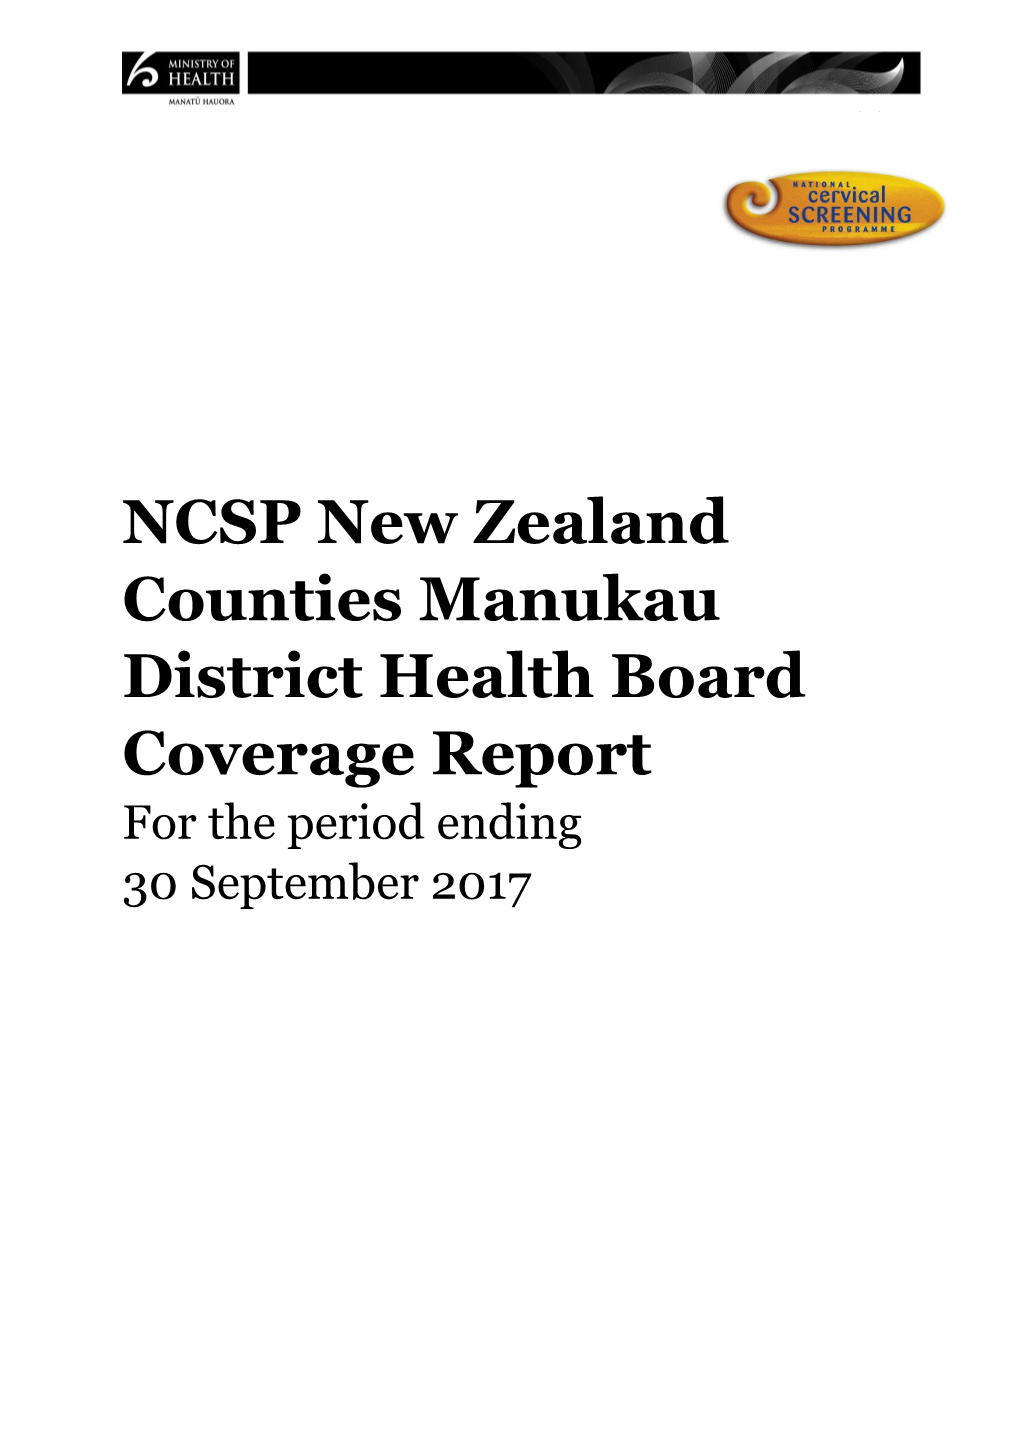 NCSP New Zealand Counties Manukau District Health Boardcoverage Report